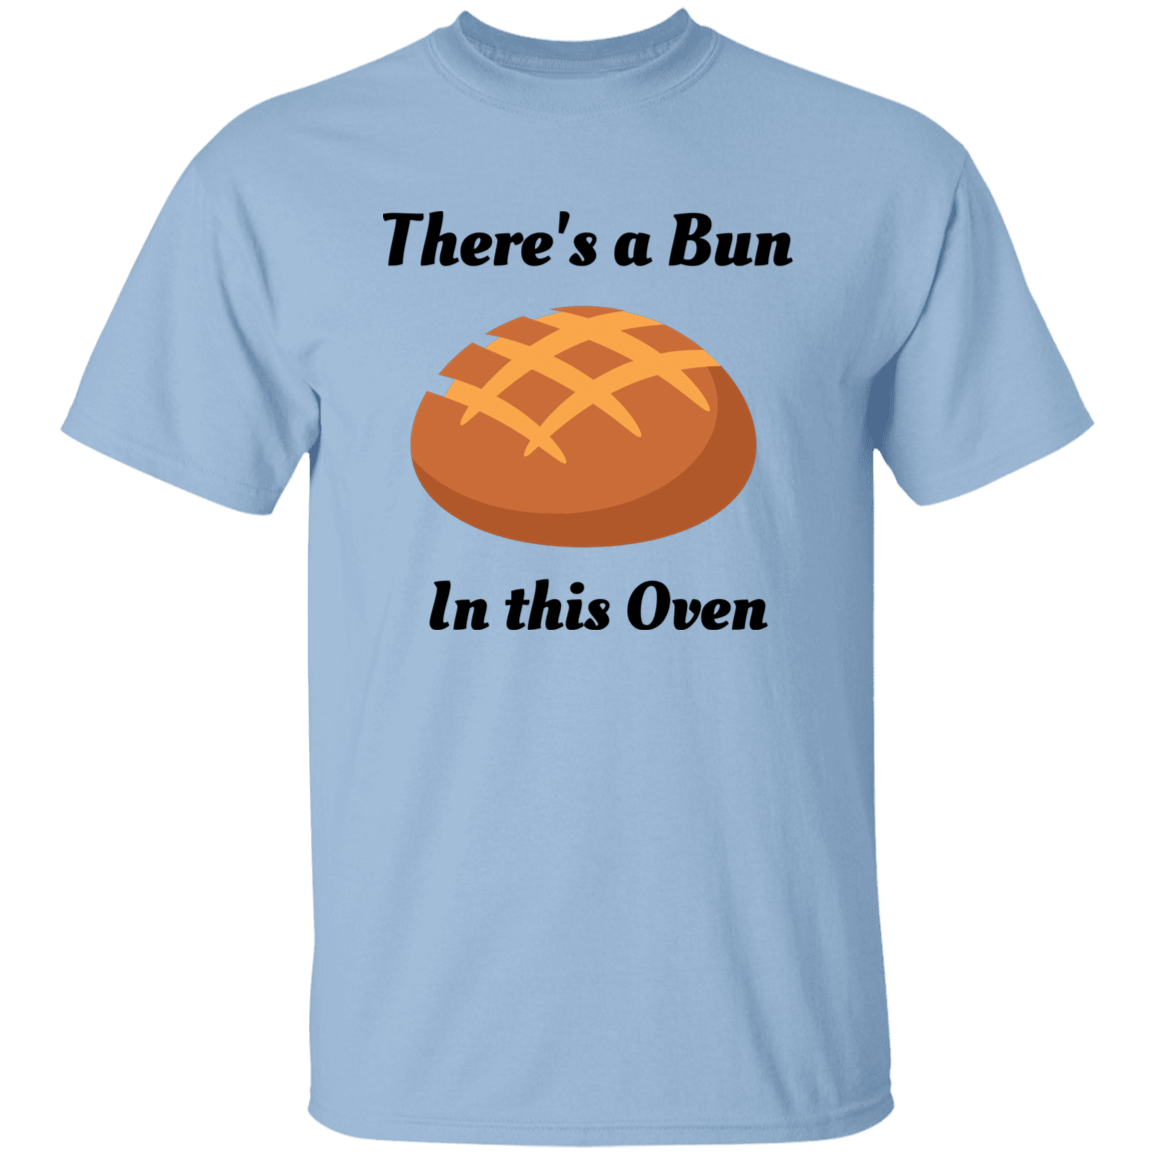 There's a Bun..... T-Shirt